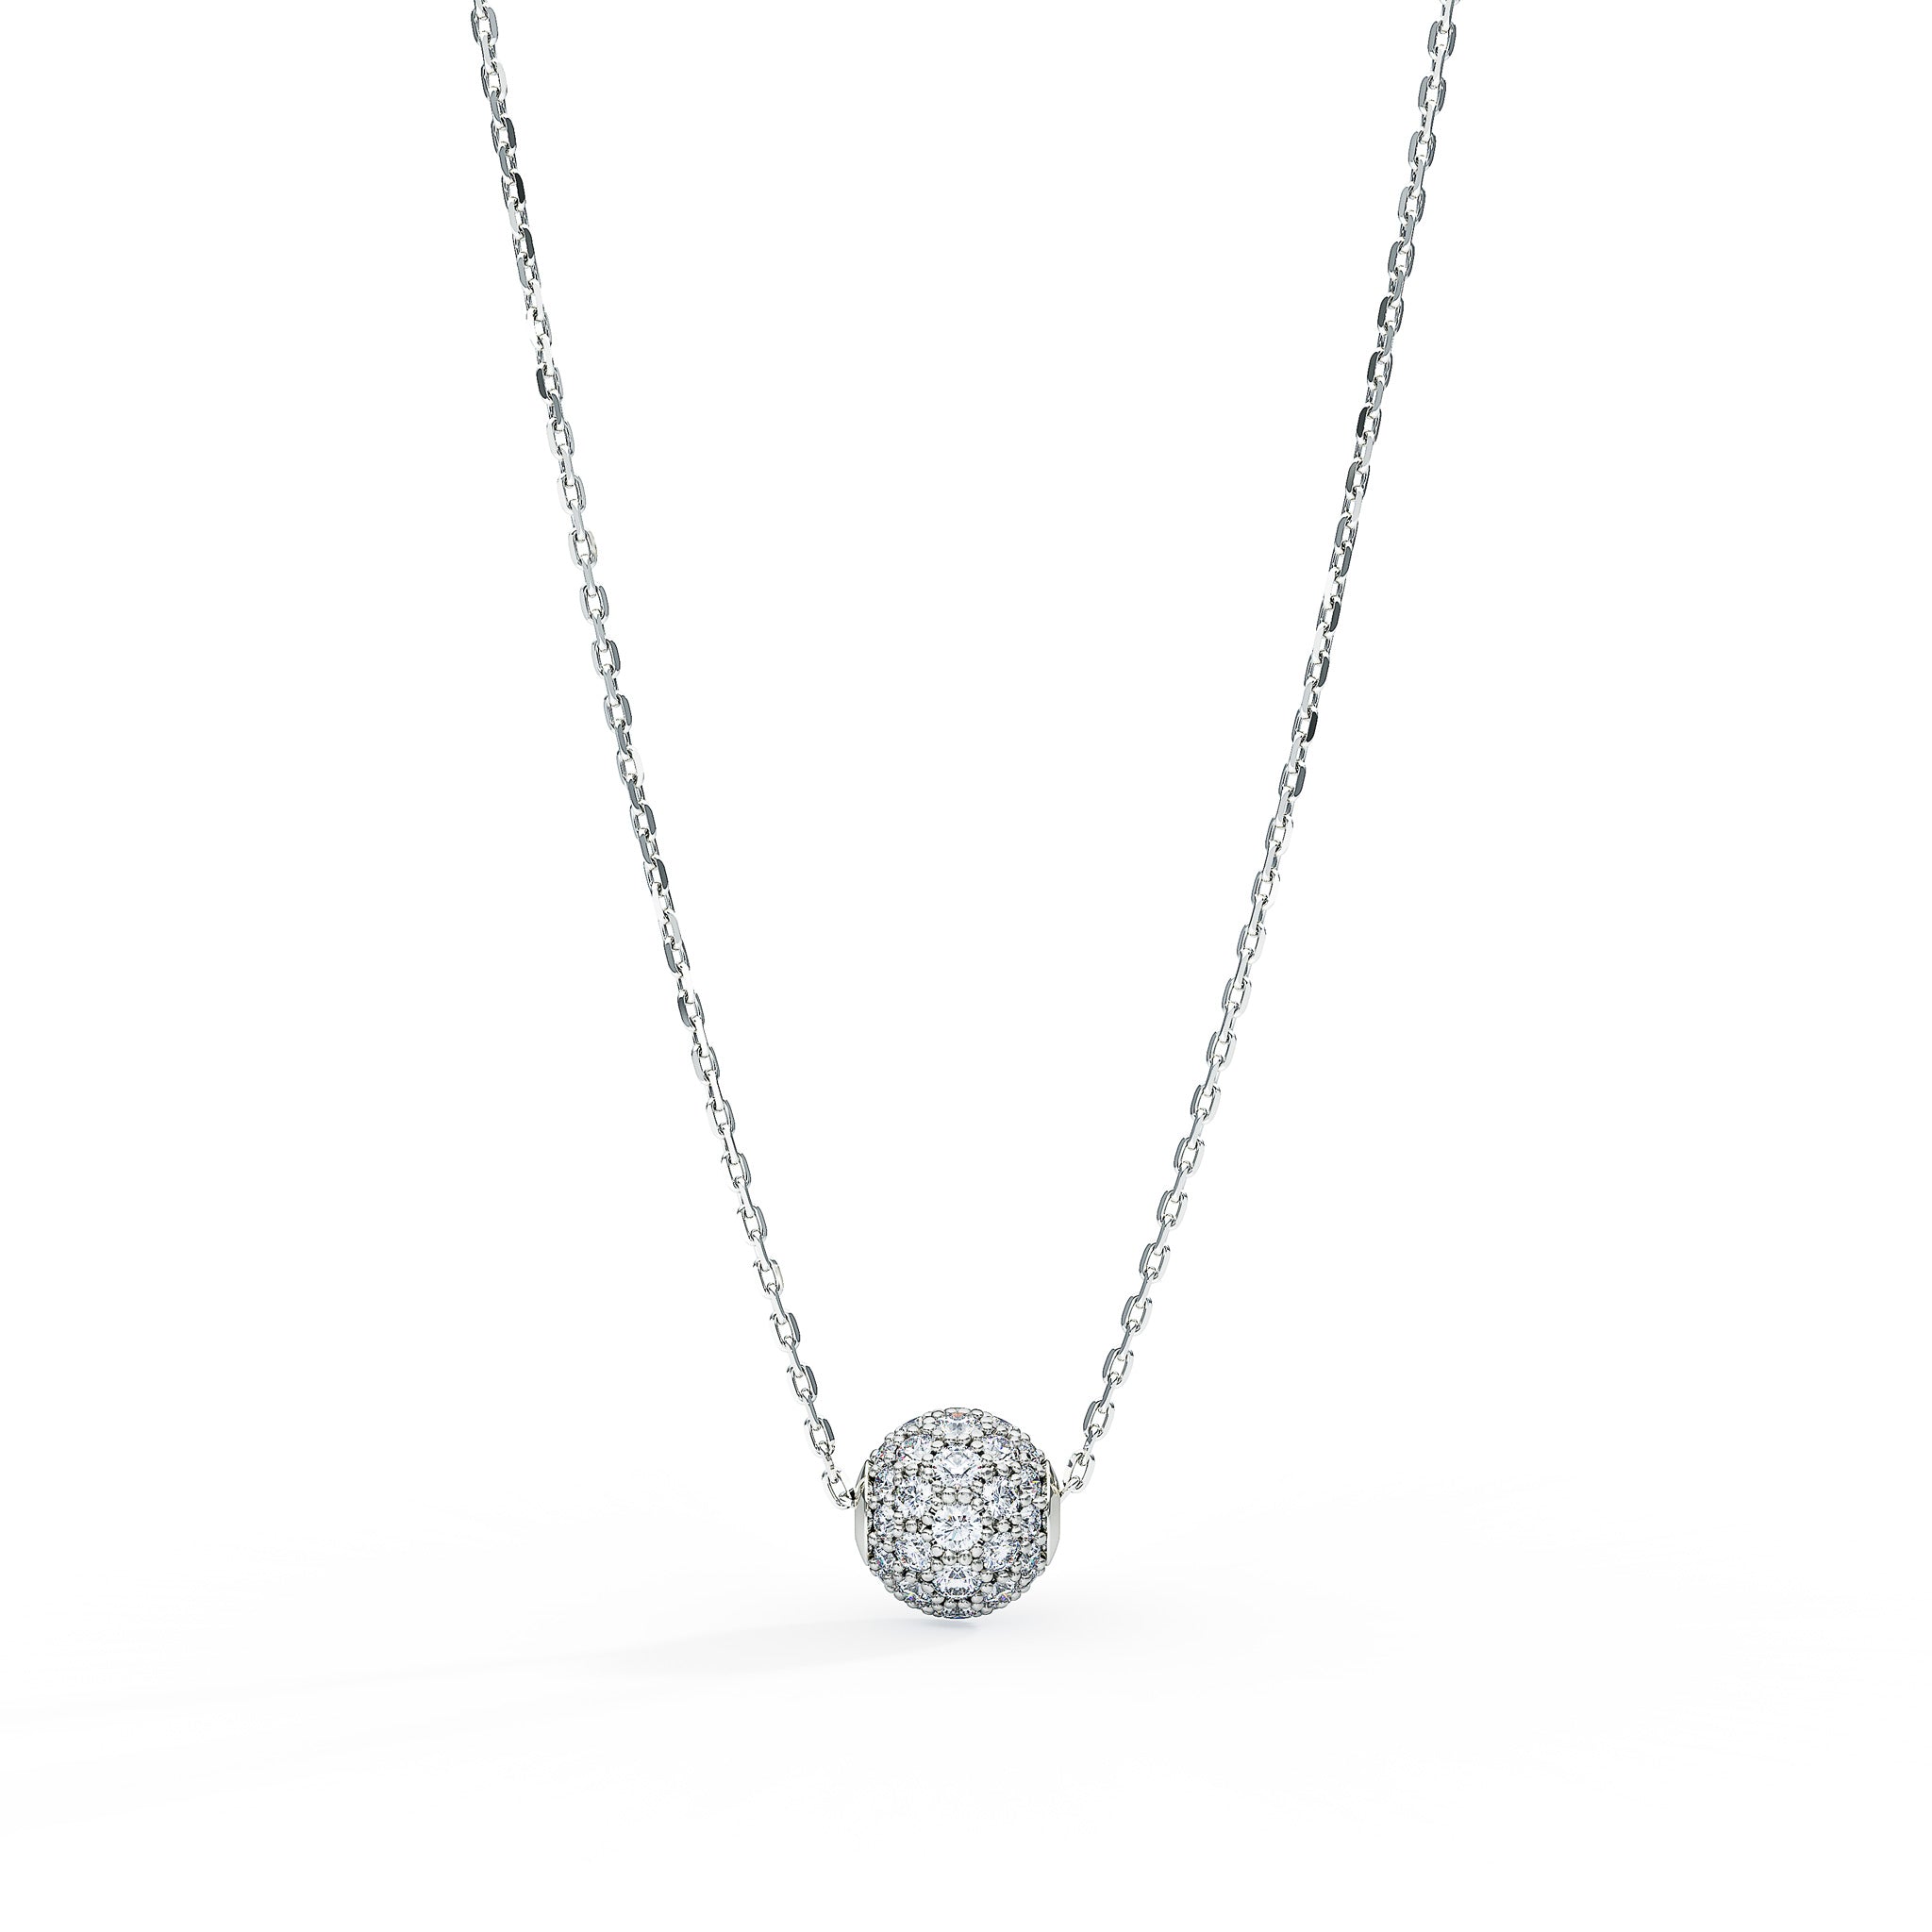 Diamond Pave Ball Slider Necklace in 14K White Gold